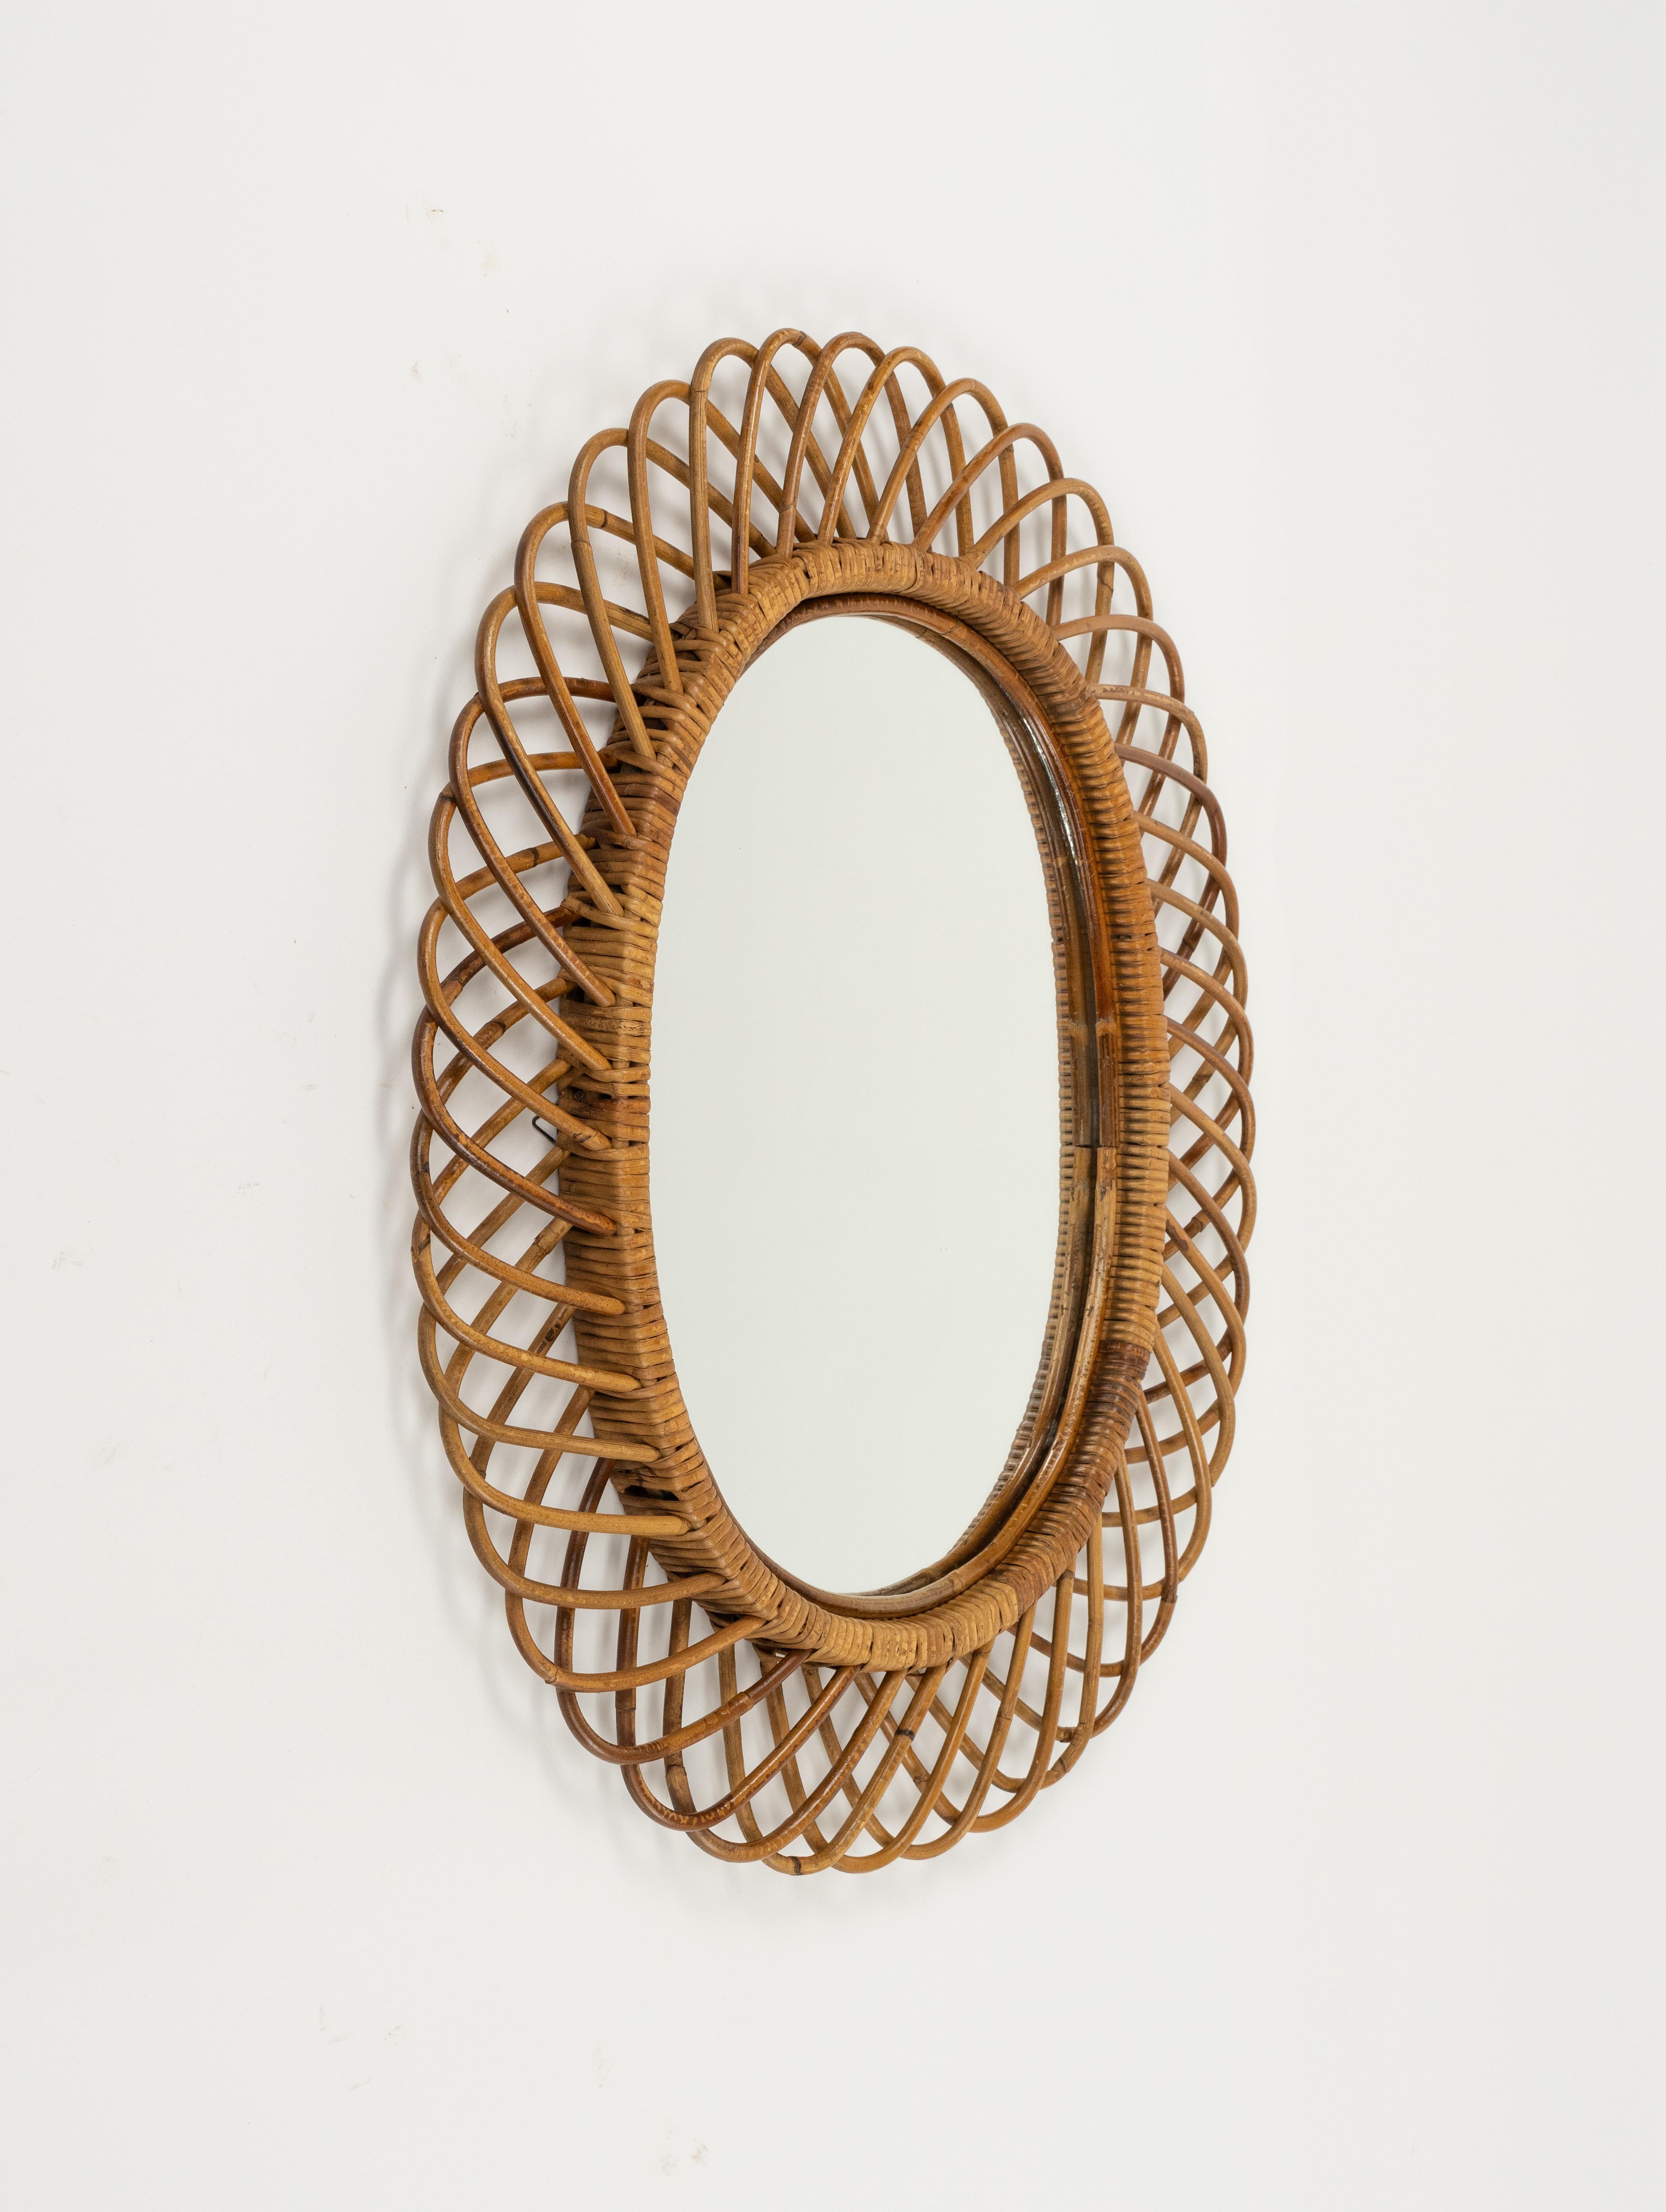 Midcentury Rattan and Bamboo Oval Wall Mirror by Franco Albini, Italy 1960s For Sale 4